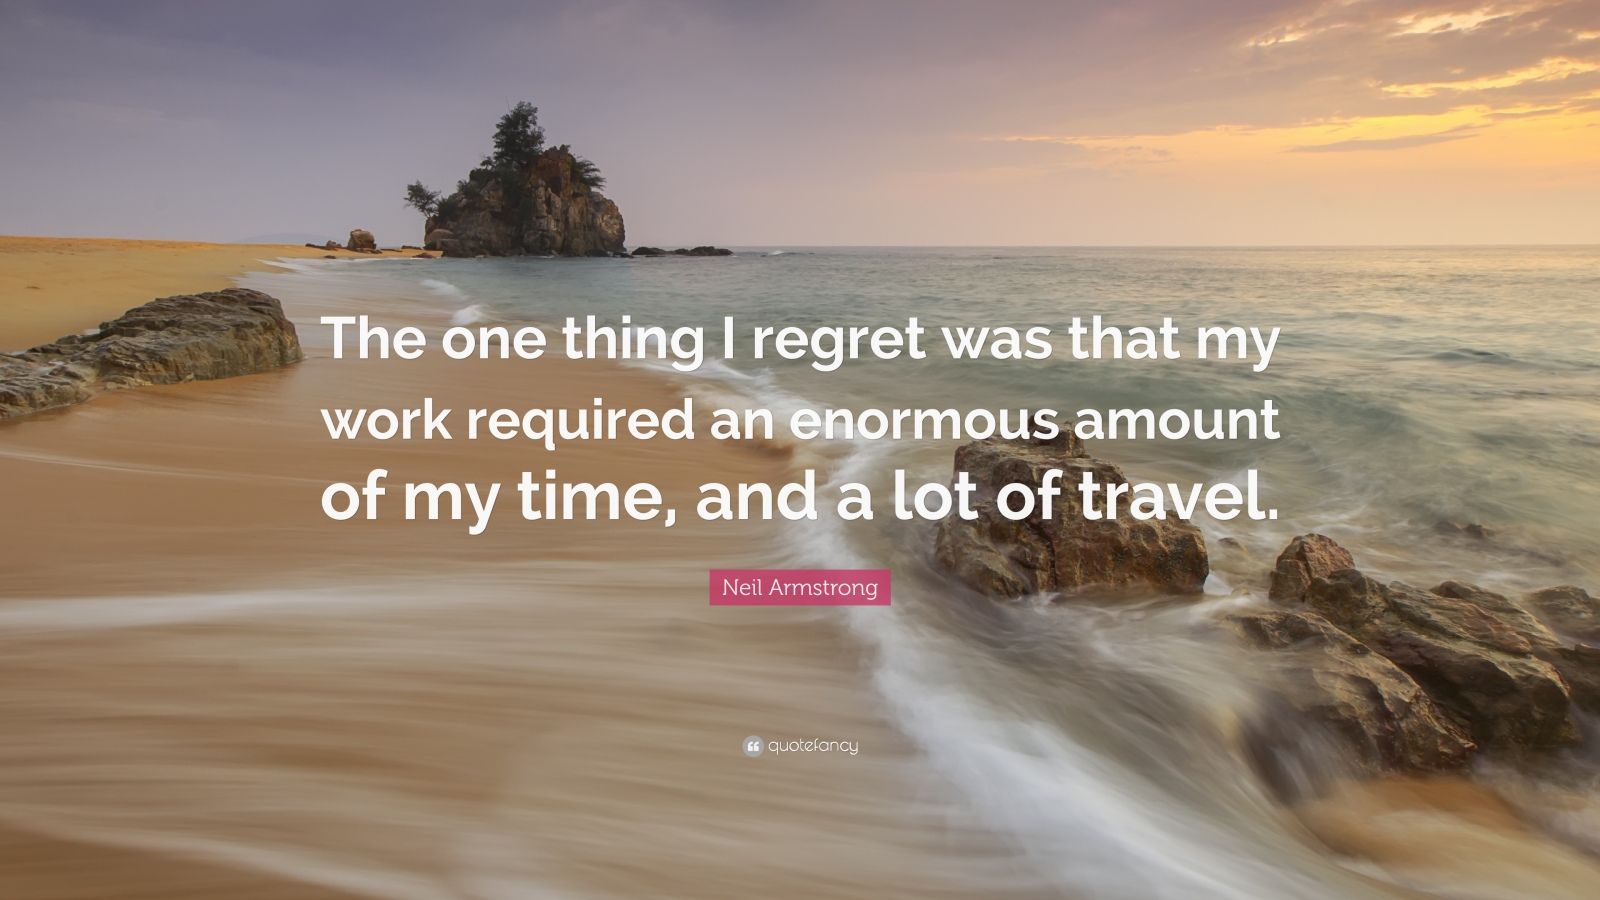 Top 40 Regret Quotes | 2021 Edition | Free Images - QuoteFancy